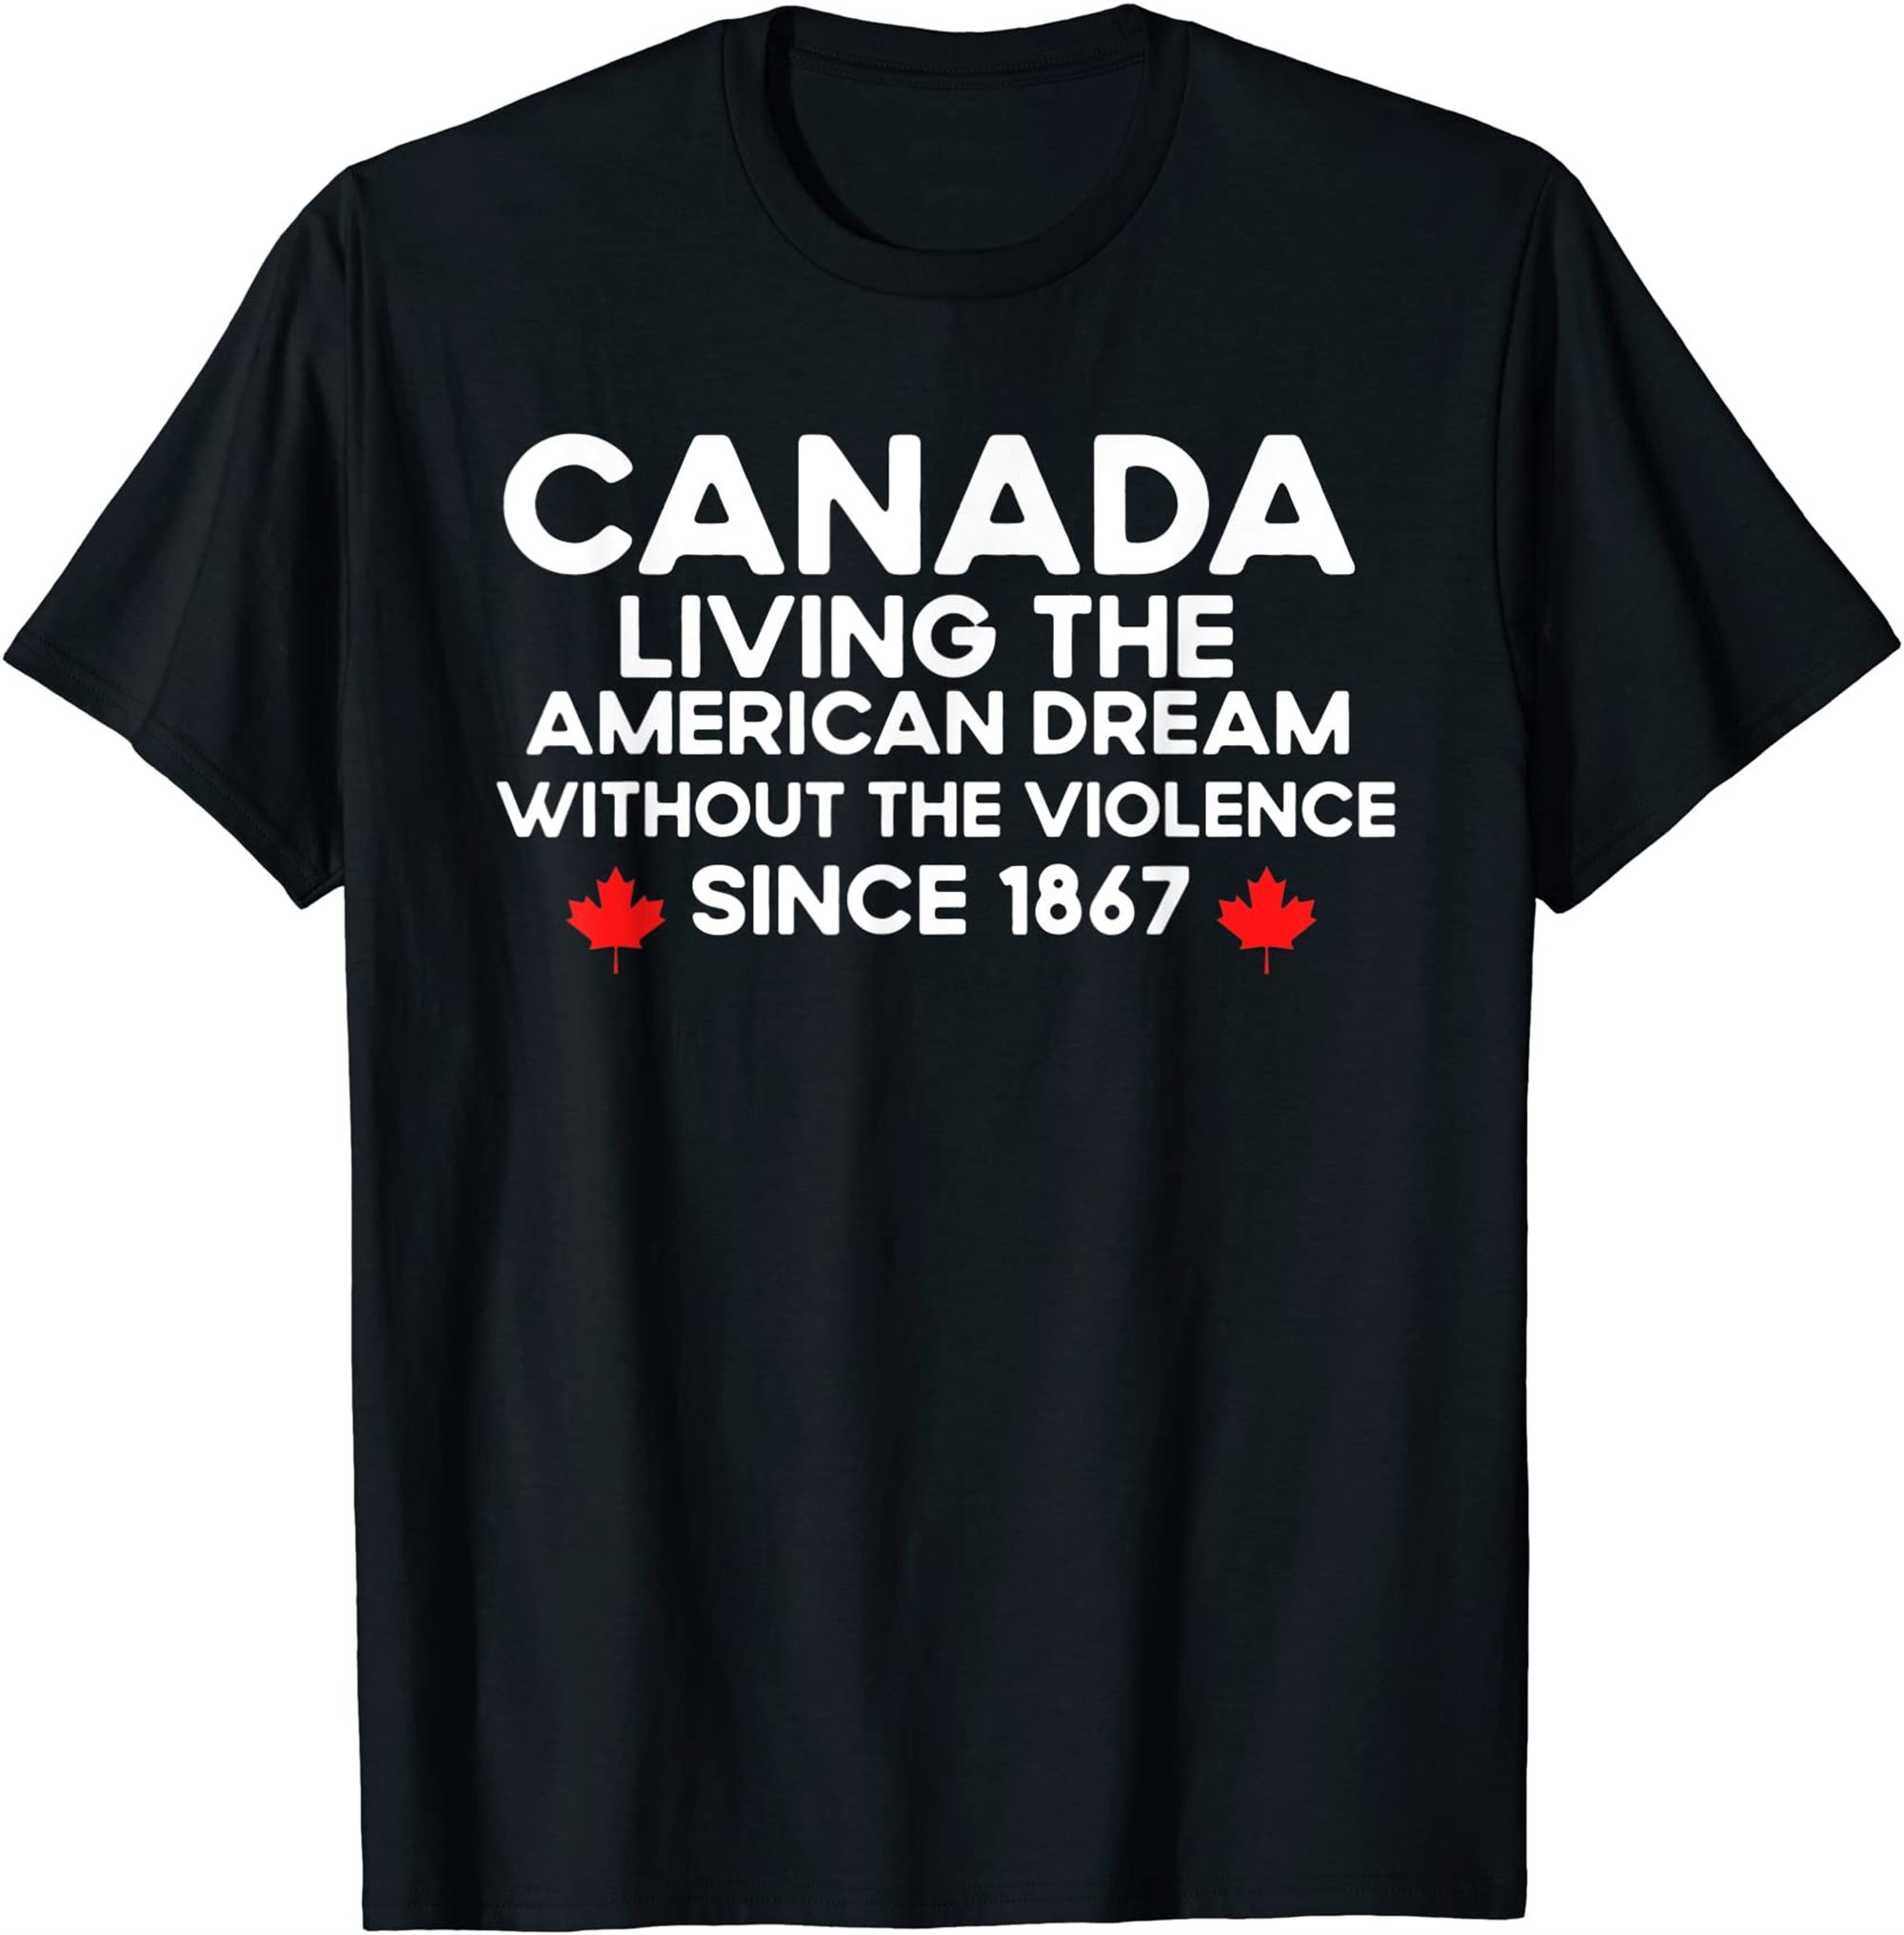 Canada Living The American Dream Without The Violence Since T-shirt Size Up To 5xl